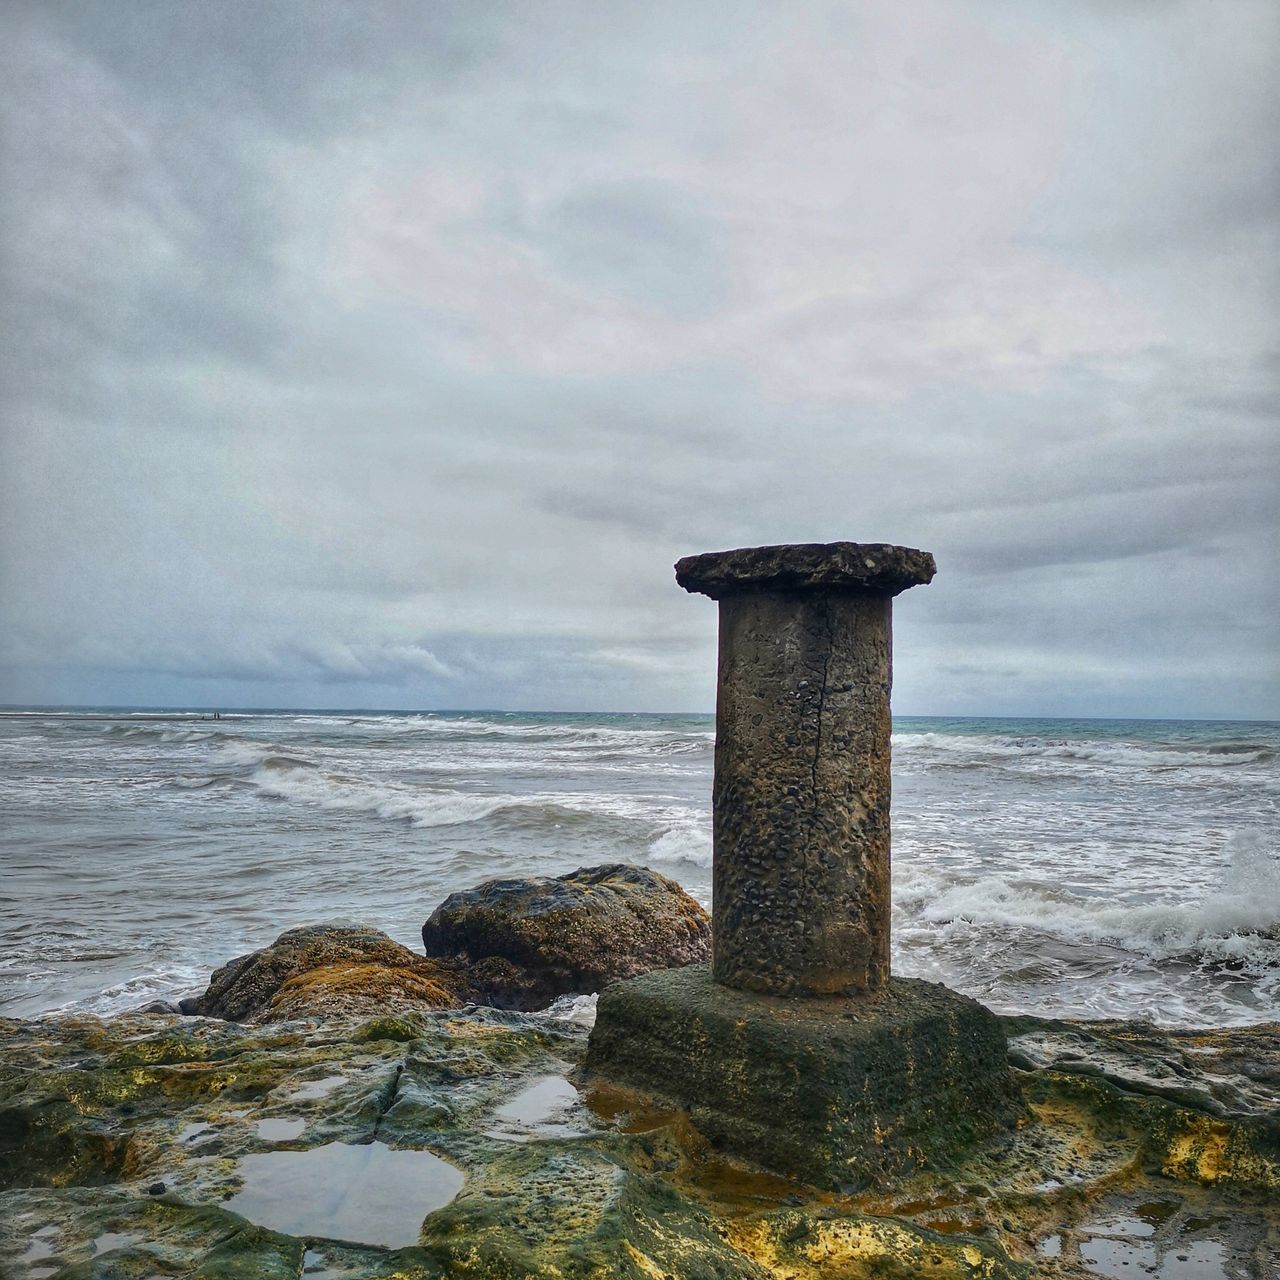 sea, water, tower, coast, rock, sky, ocean, beach, land, cloud, shore, nature, no people, body of water, scenics - nature, beauty in nature, architecture, horizon over water, wave, environment, outdoors, day, horizon, tranquility, lighthouse, guidance, built structure, coastline, tranquil scene, seascape, protection